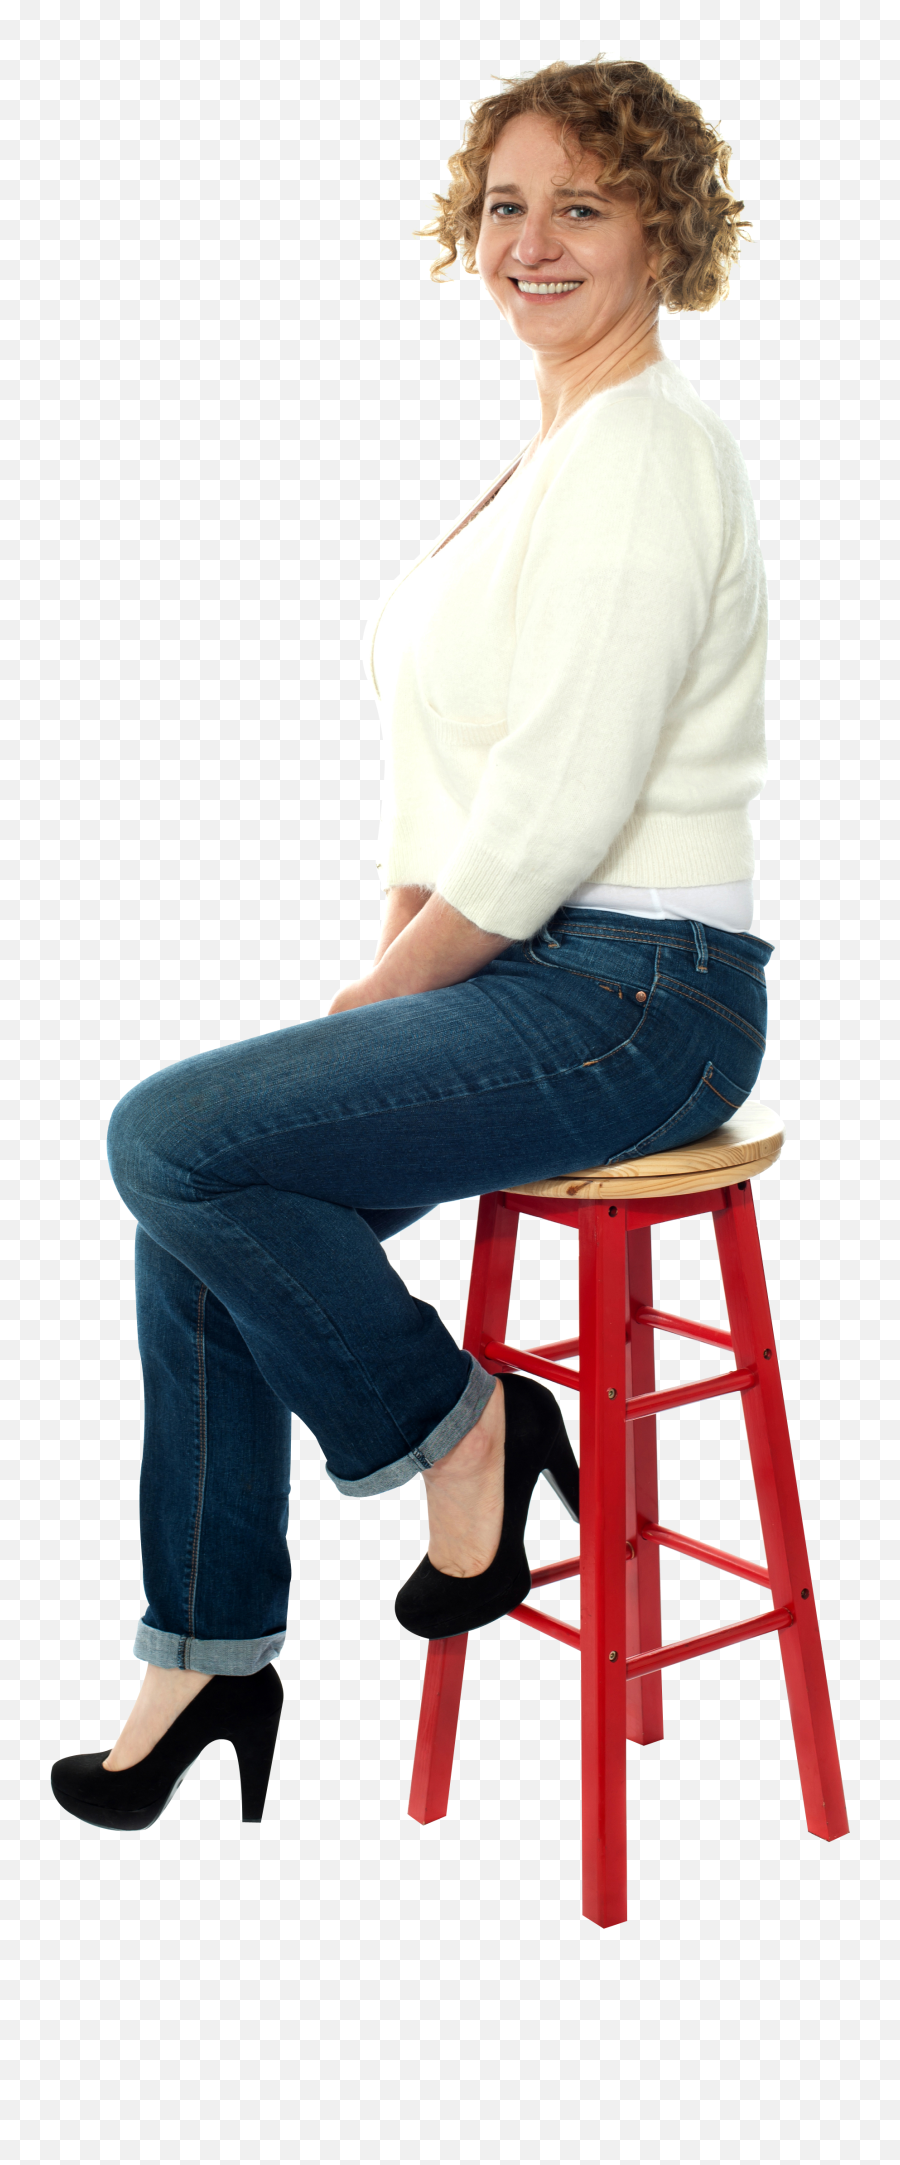 Download Happy Women Png Image For Free - Portable Network Graphics,Woman Sitting Png